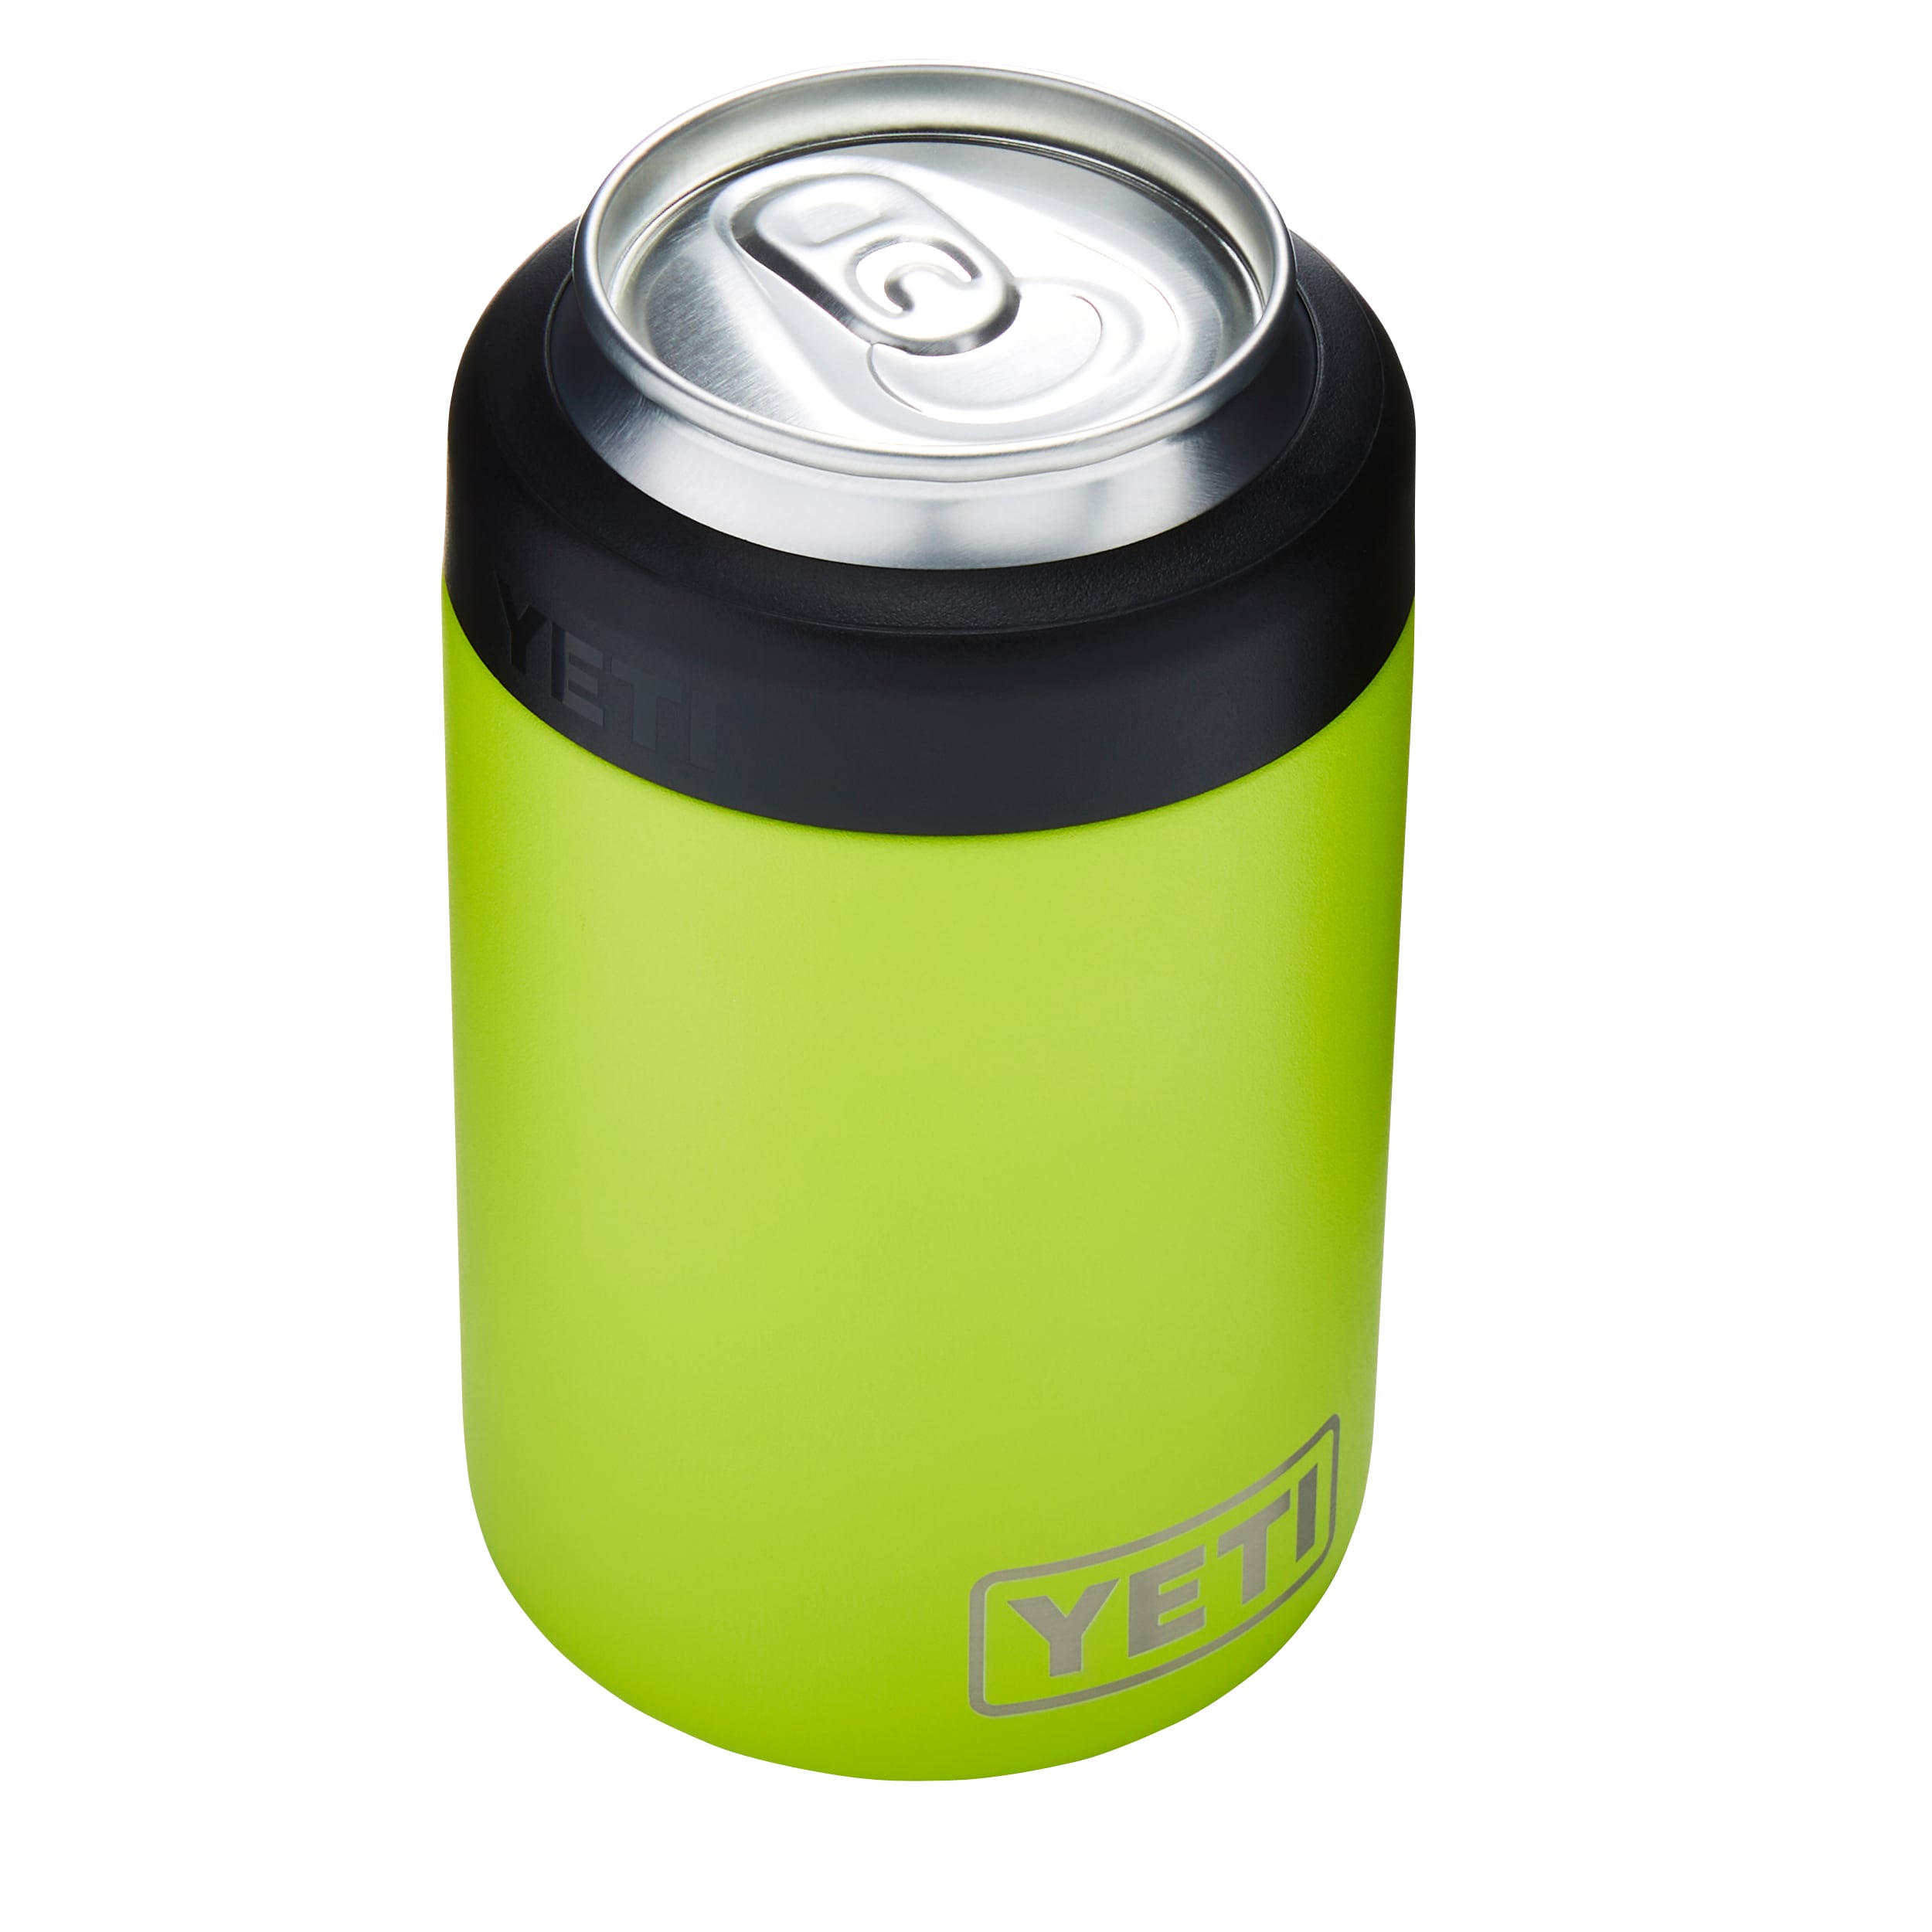 ISO YETI Chartreuse 16oz Pint!! !!nothing For Sale!!! for Sale in